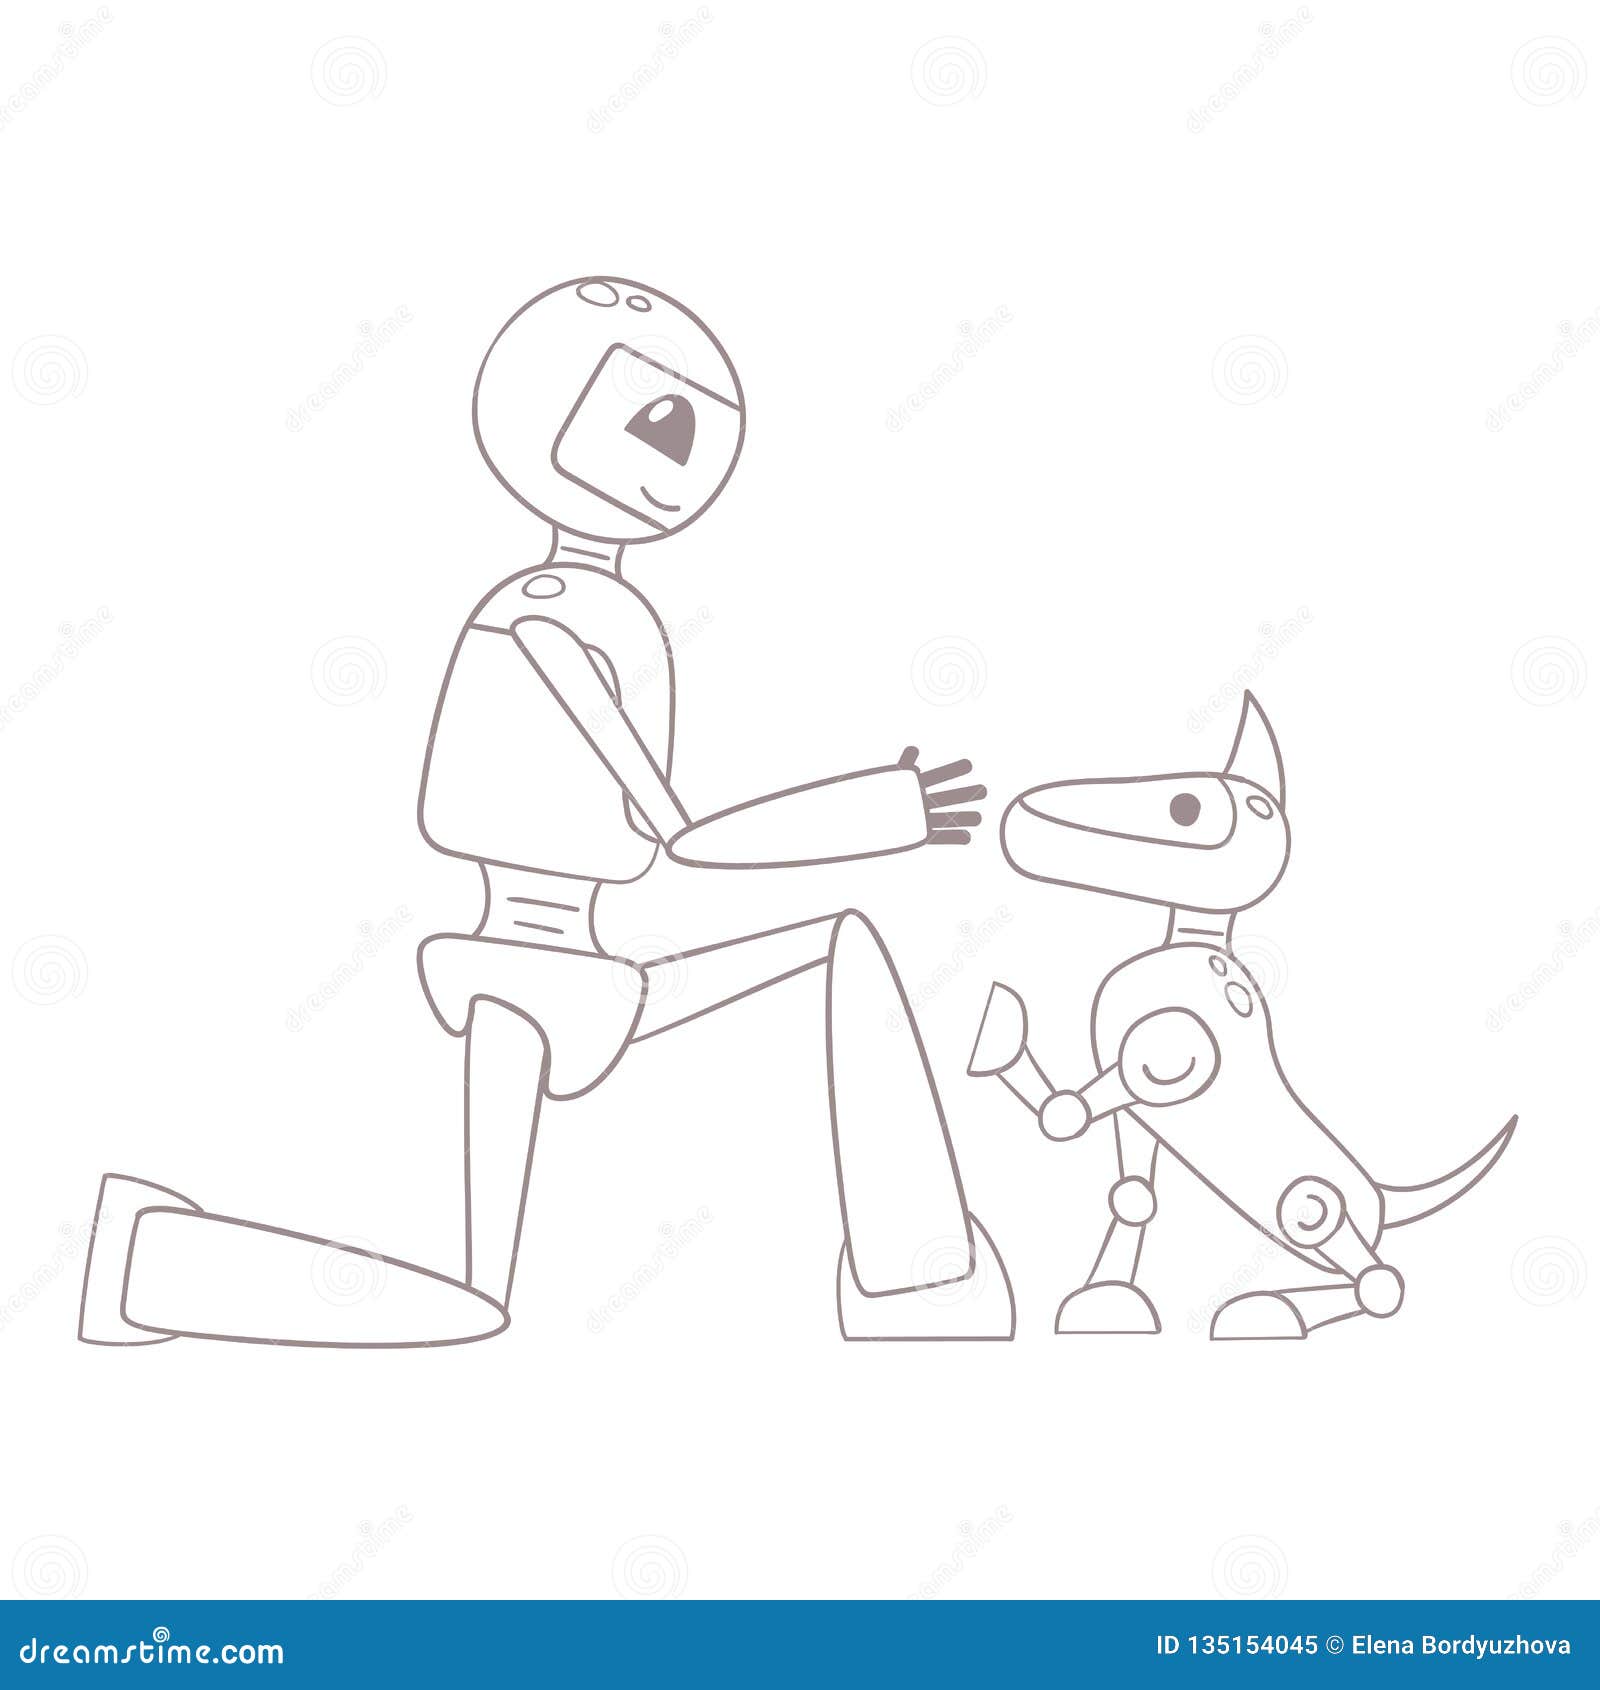 Illustration With Robot And Robot Dog Stock Vector - Illustration of